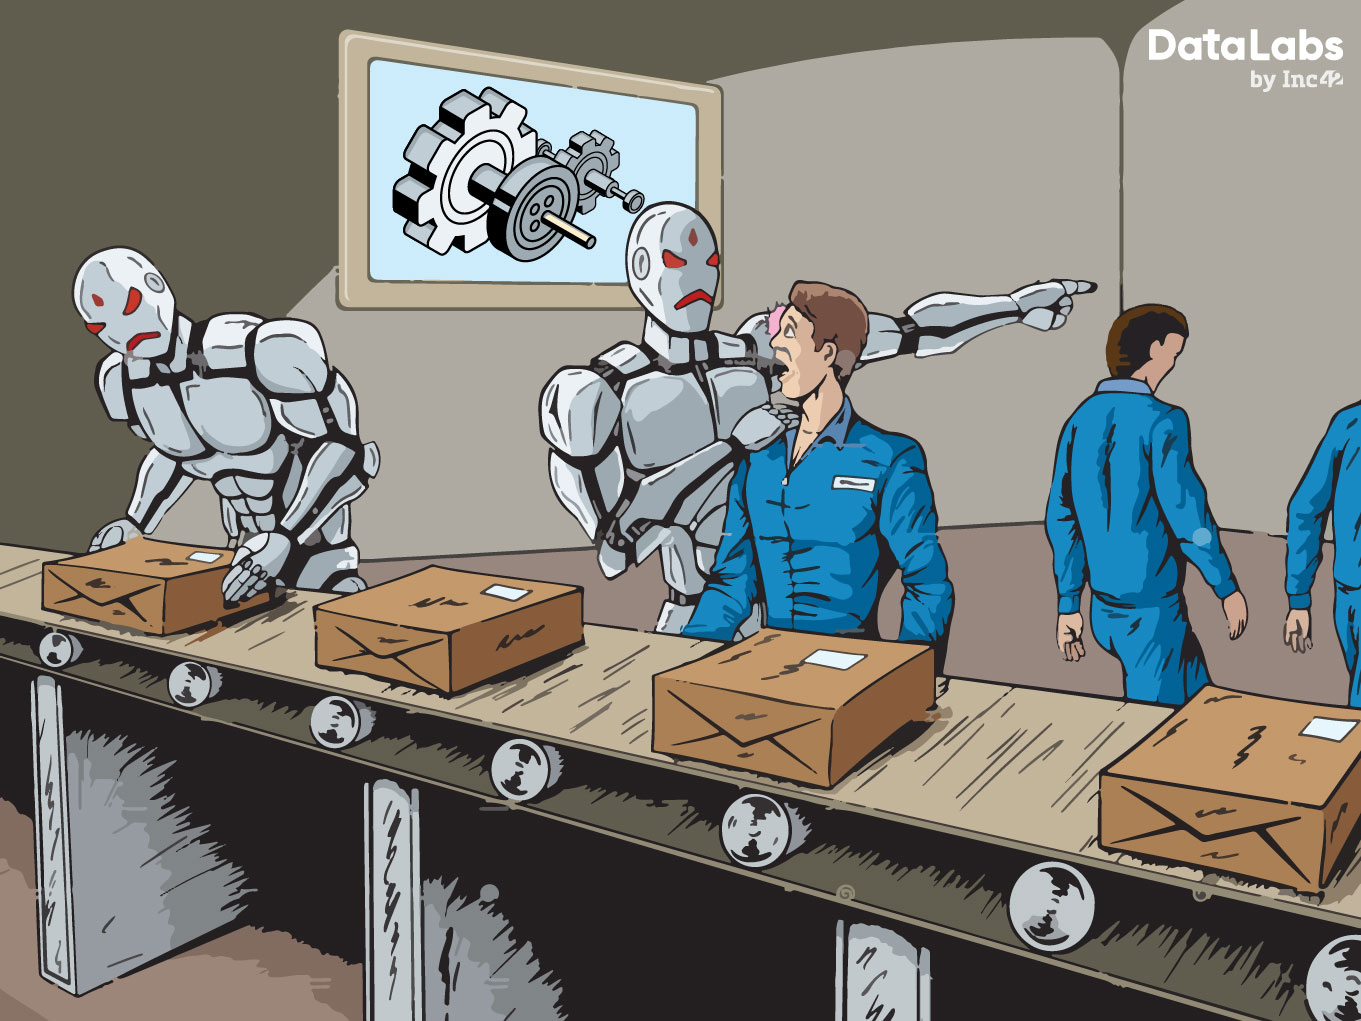 The Uncanny Valley: How Artificial Intelligence, Automation Have Eroded Human Interaction